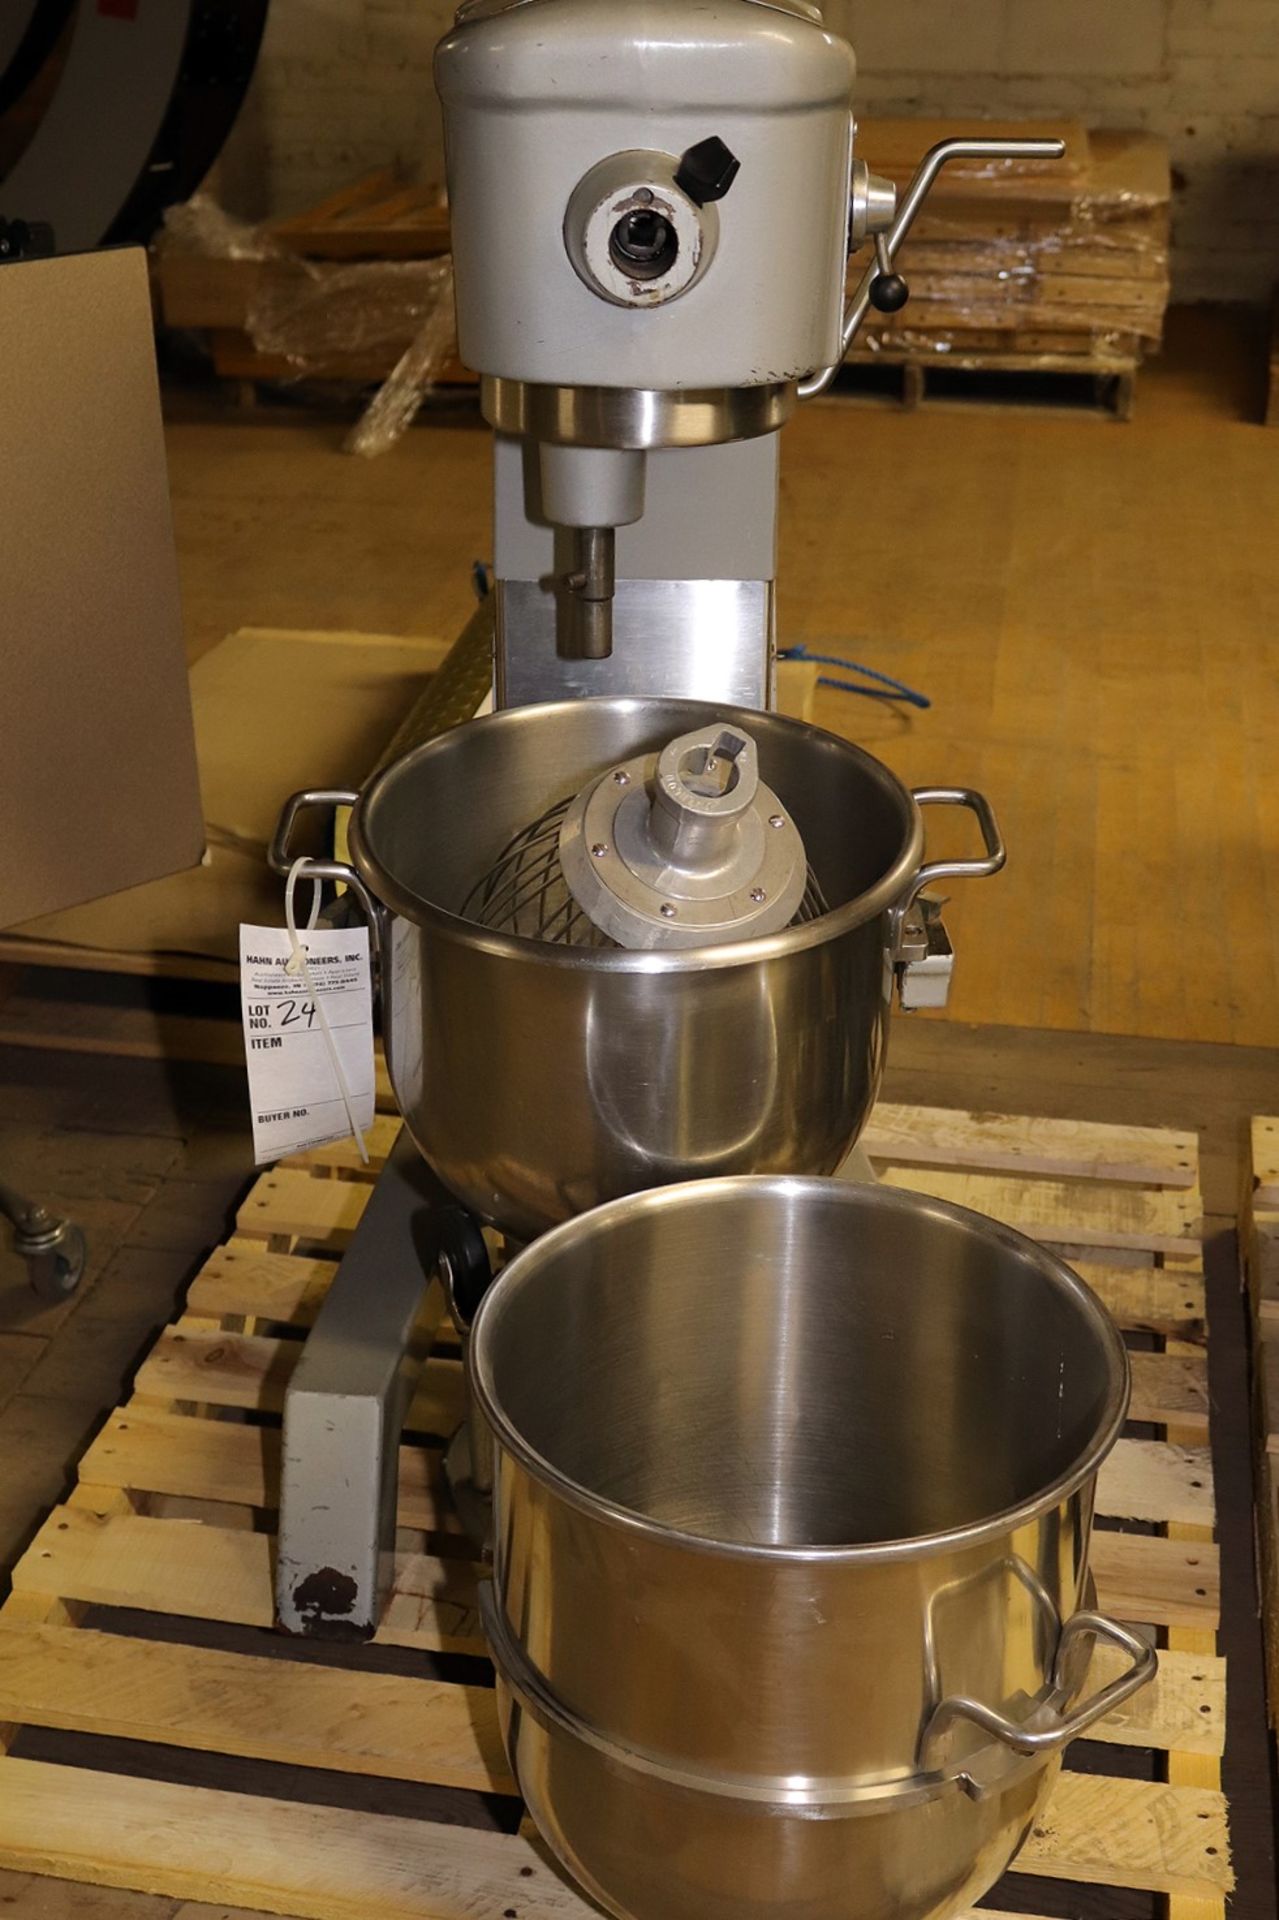 Hobart Commercial Mixer Model D300T with bowl and attachments